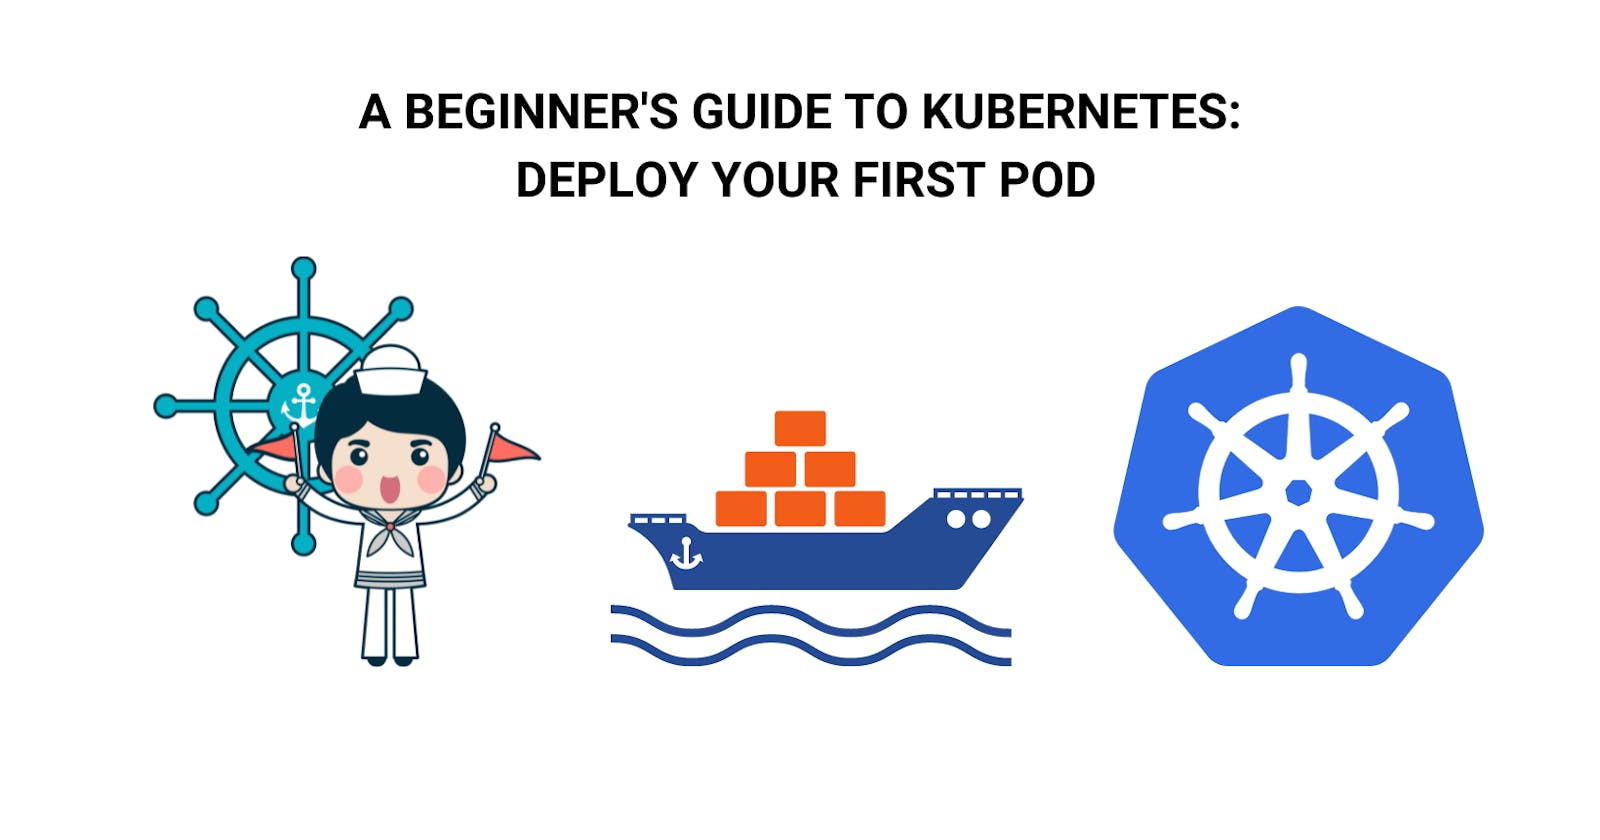 A Beginner's Guide to Kubernetes: Deploy your First Pod